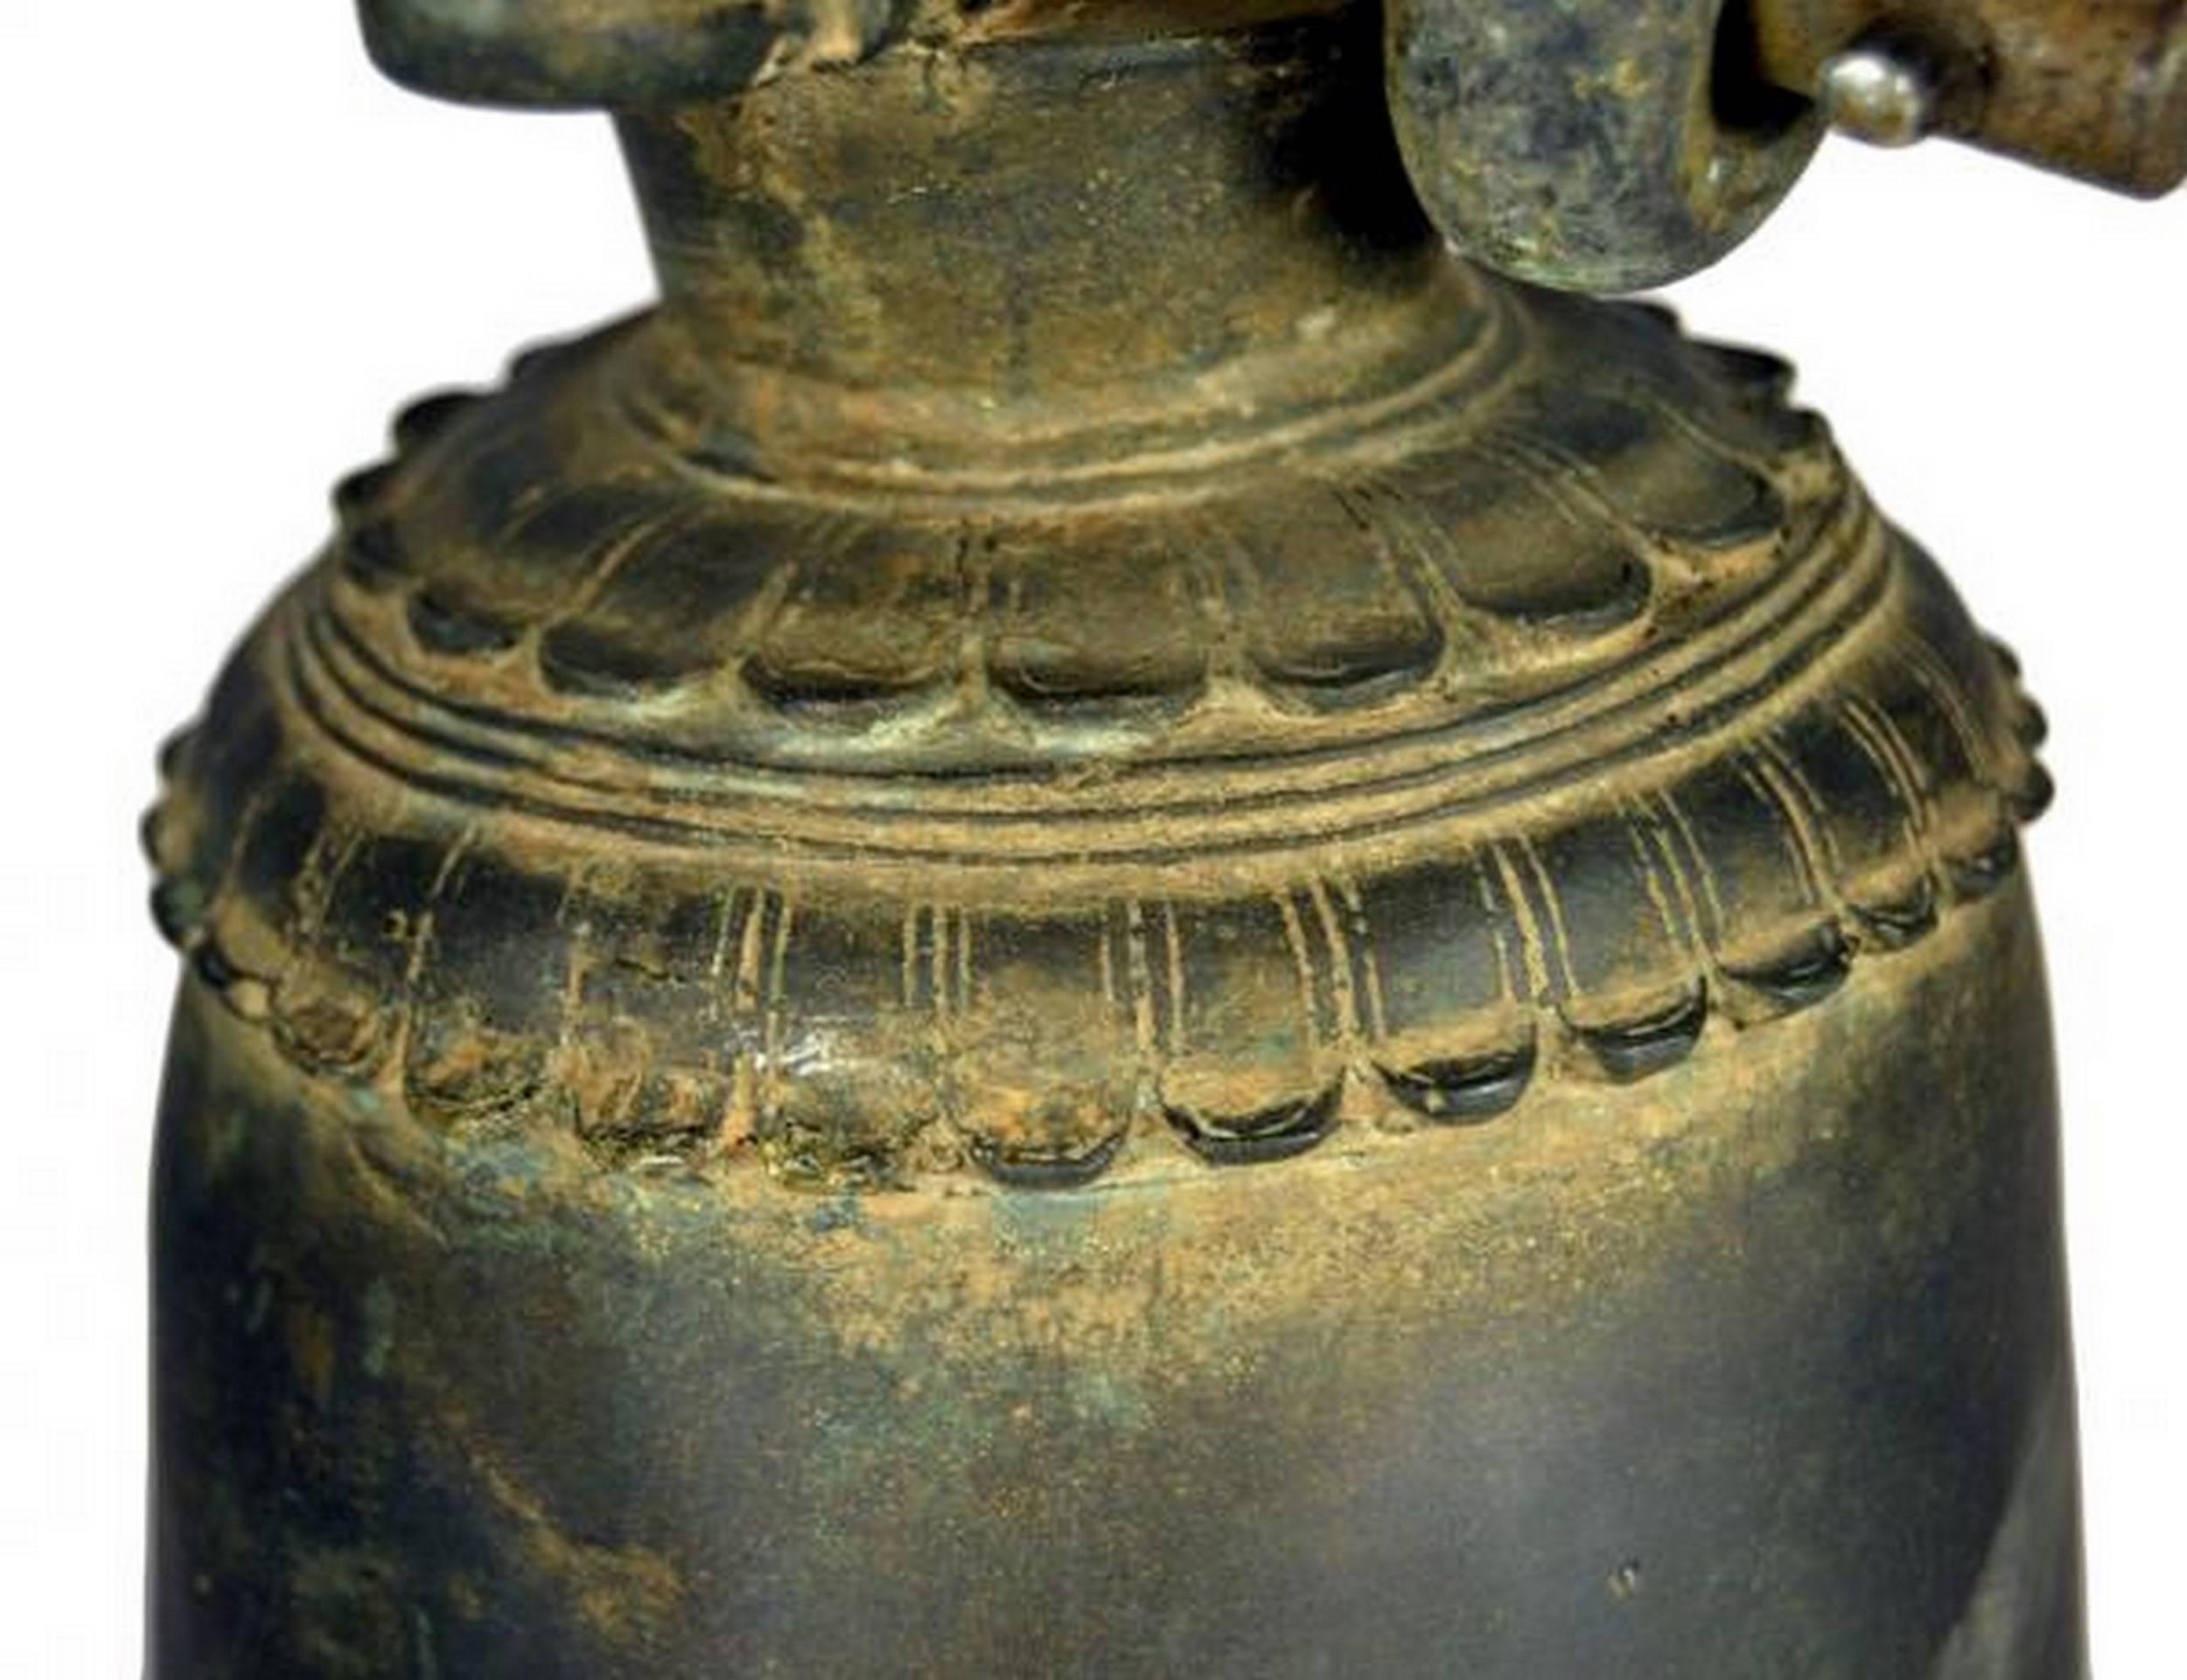 Antique Burmese Temple Bronze Bell with Elaborate Adornment, 18th Century 1